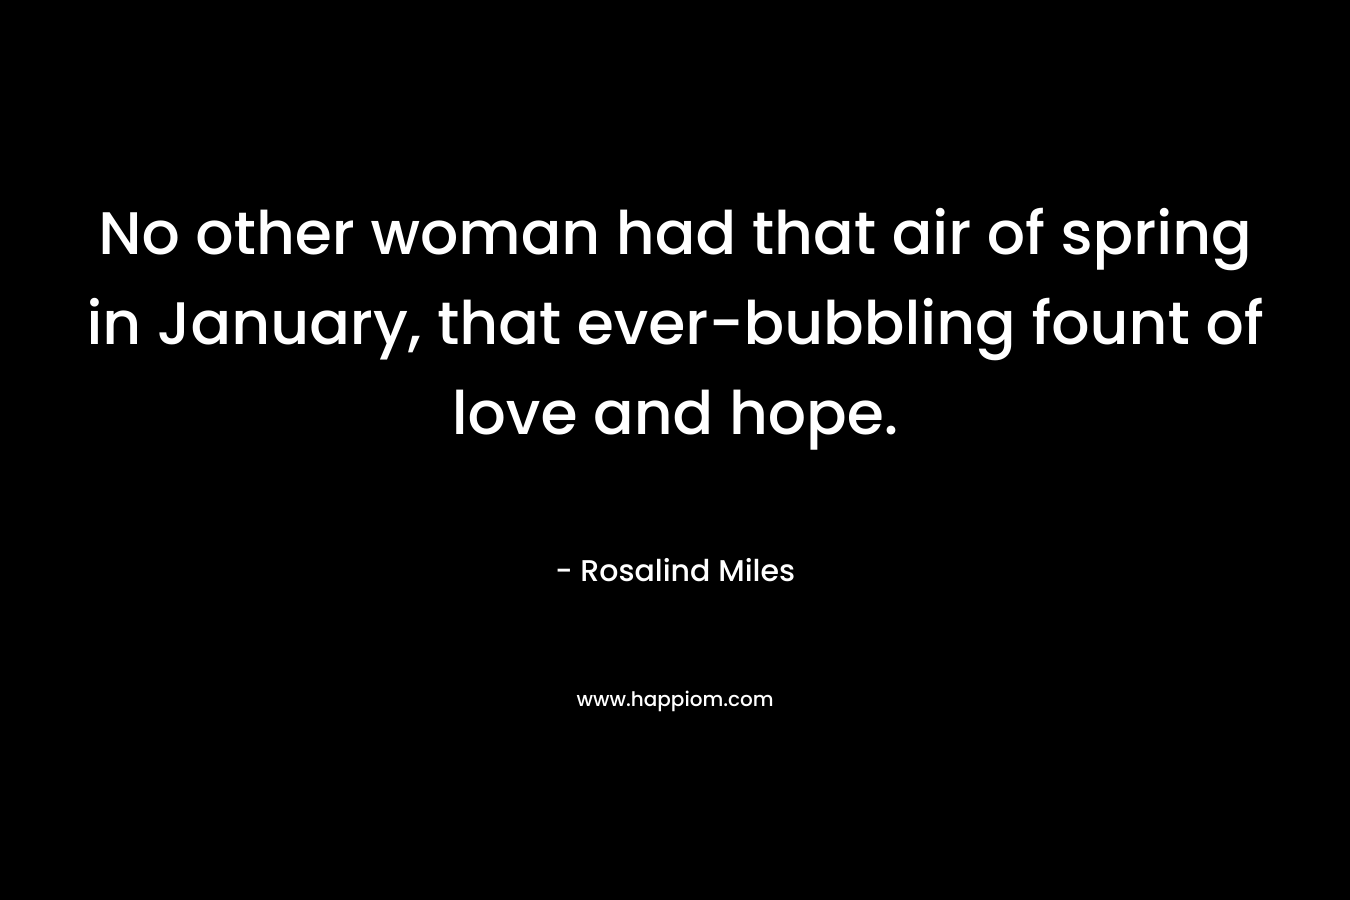 No other woman had that air of spring in January, that ever-bubbling fount of love and hope.